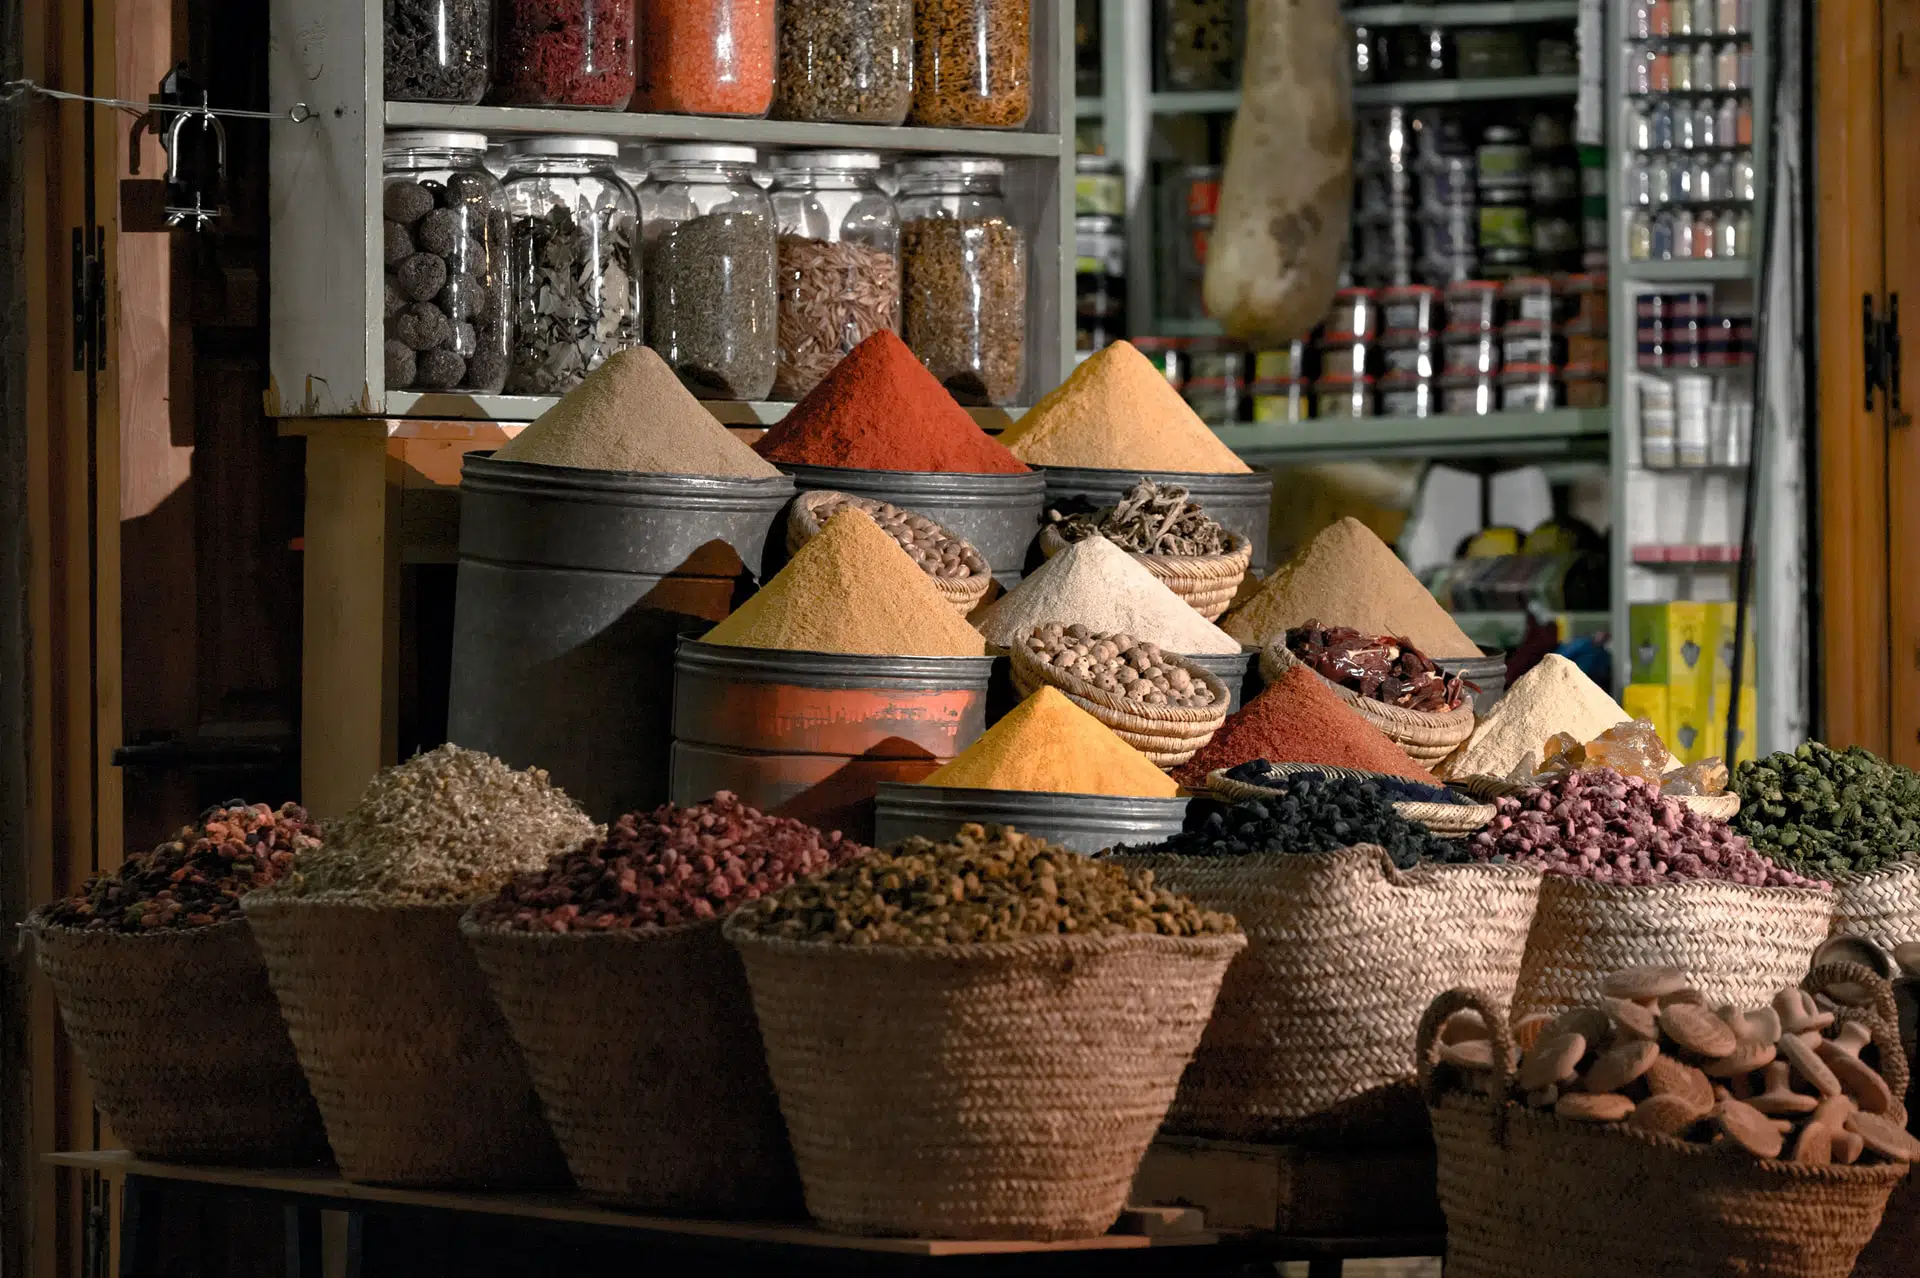 USING A GUIDE TO EXPLORE THE SOUKS OF MARRAKECH